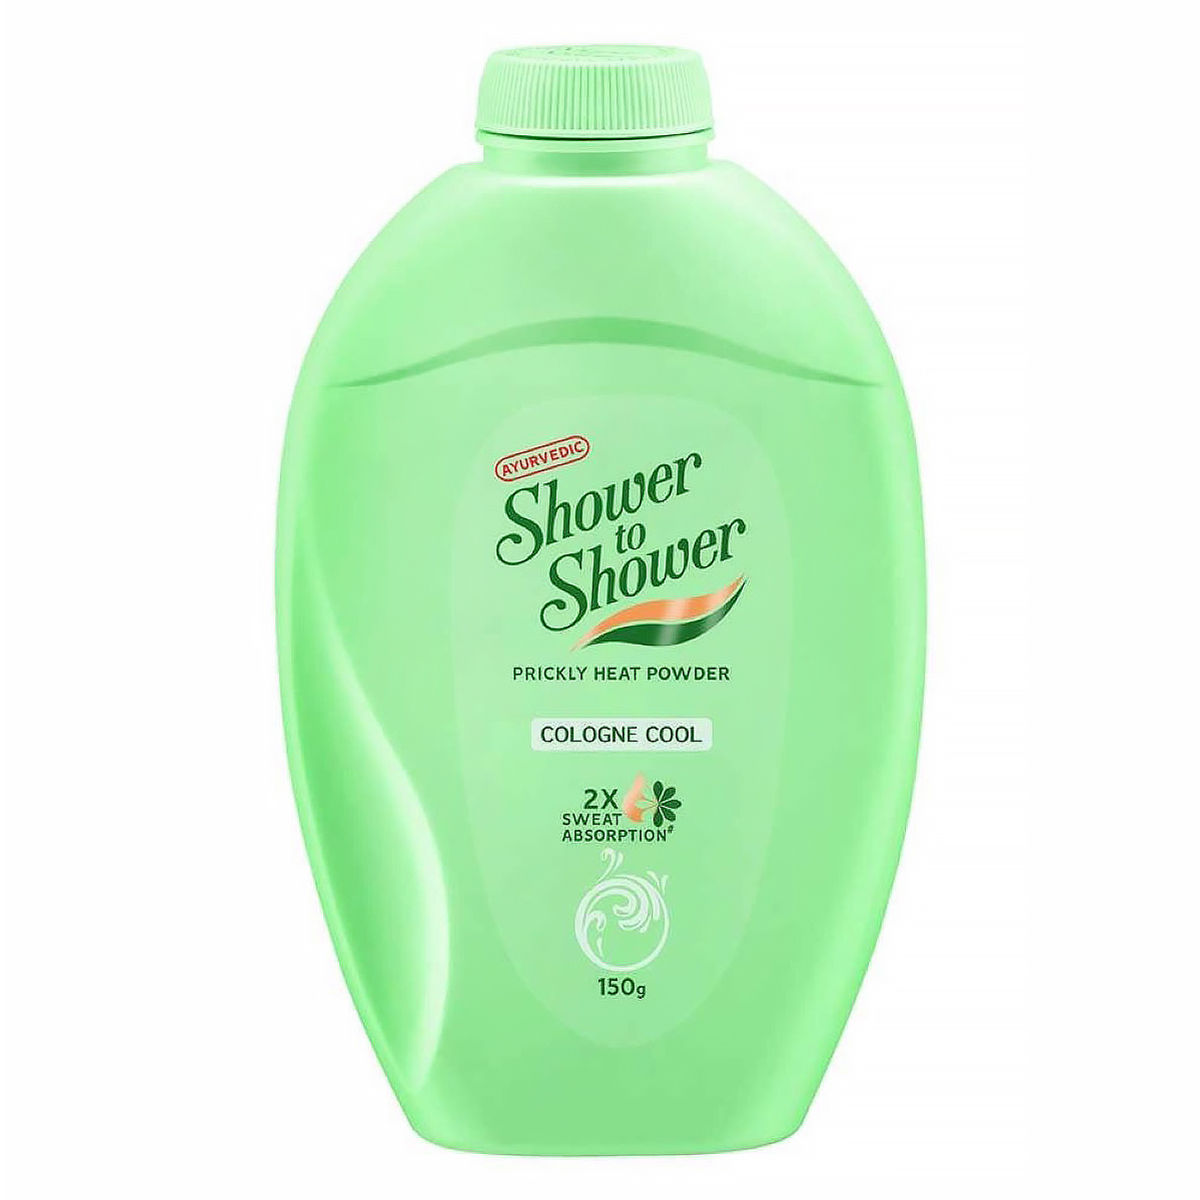 Buy Shower to Shower Prickly Heat Cologne Cool Powder, 150 gm Online